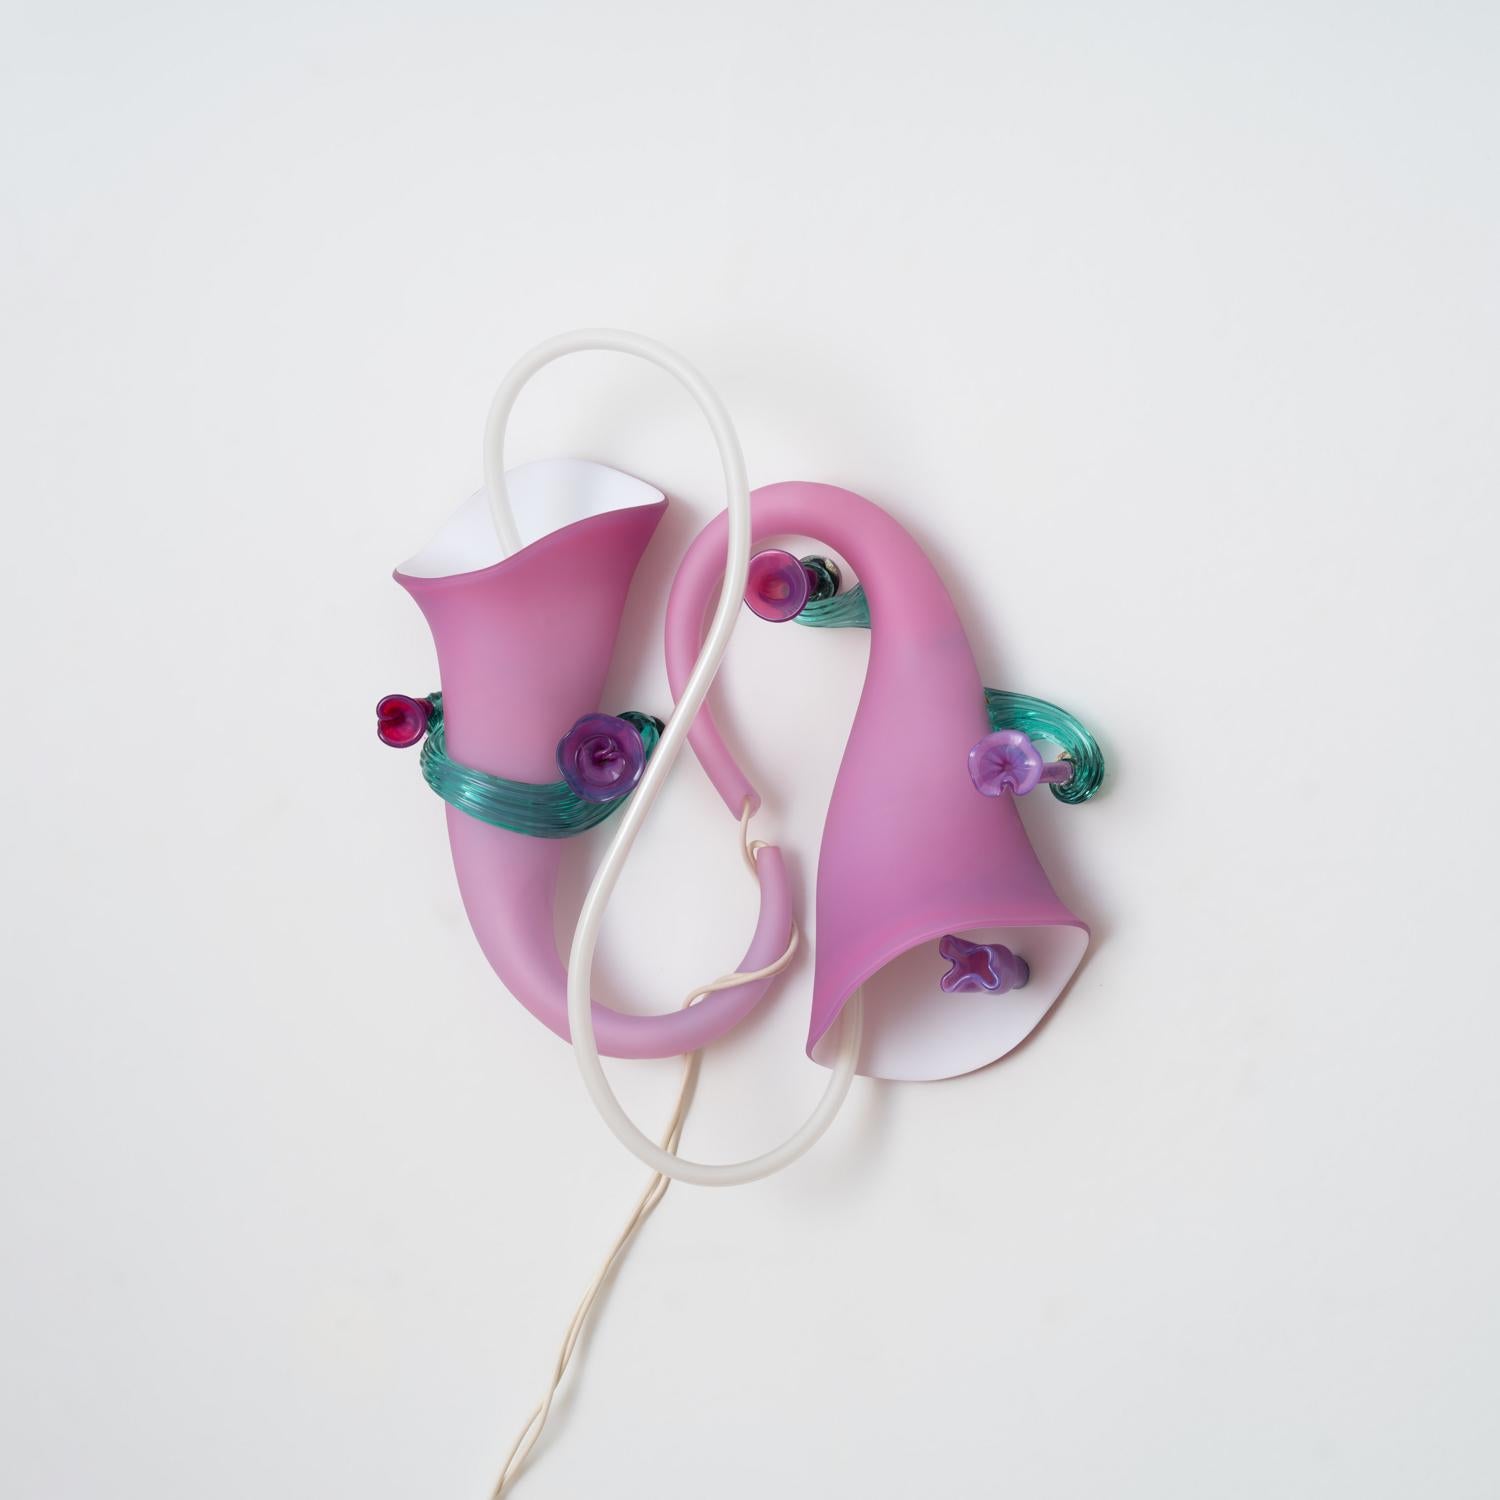 With a delicate yet playful form, Pamela Sabroso's 'Luminous Wallflowers I' sconce invites the viewer to bask in the soft neon glow. The muted, matte pink finish of the mouth-blown glass is accented with waves of glossy teal and violet stems and